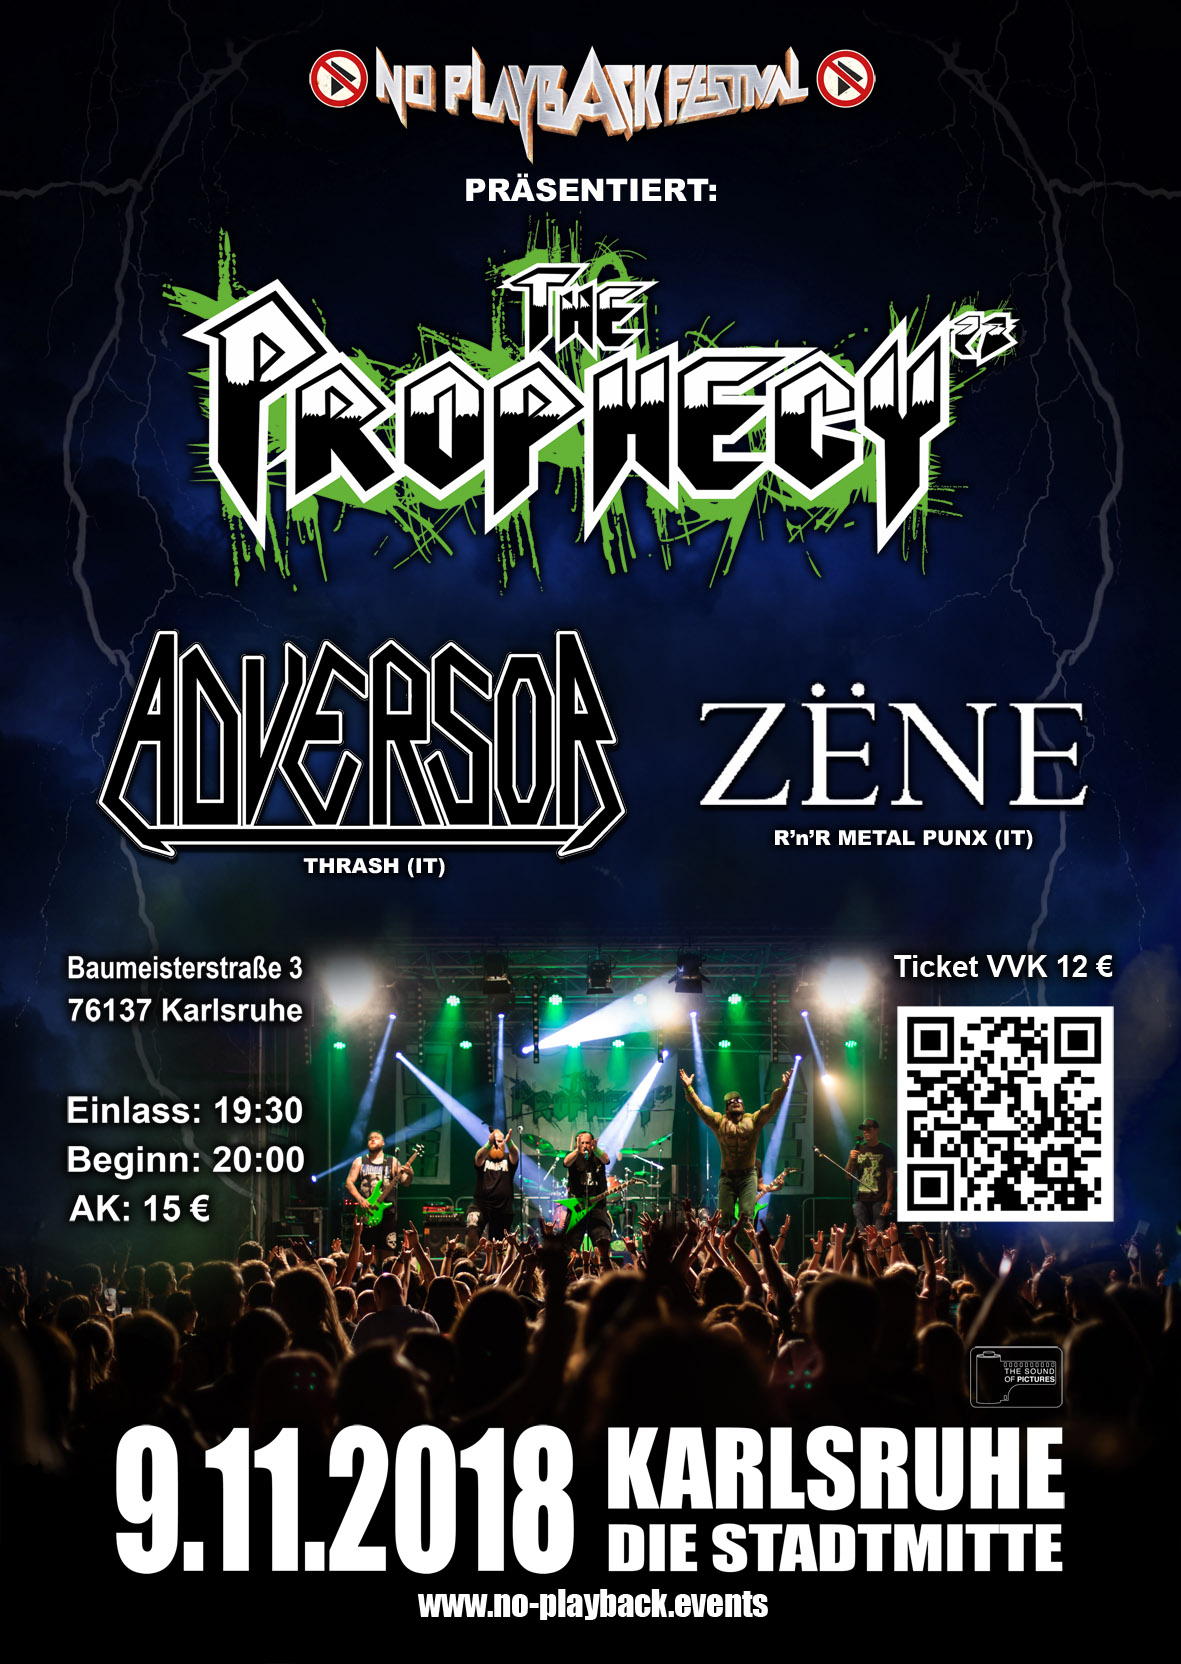 No Playback Festival presents Adversor,The Prophecy 23 and Zene